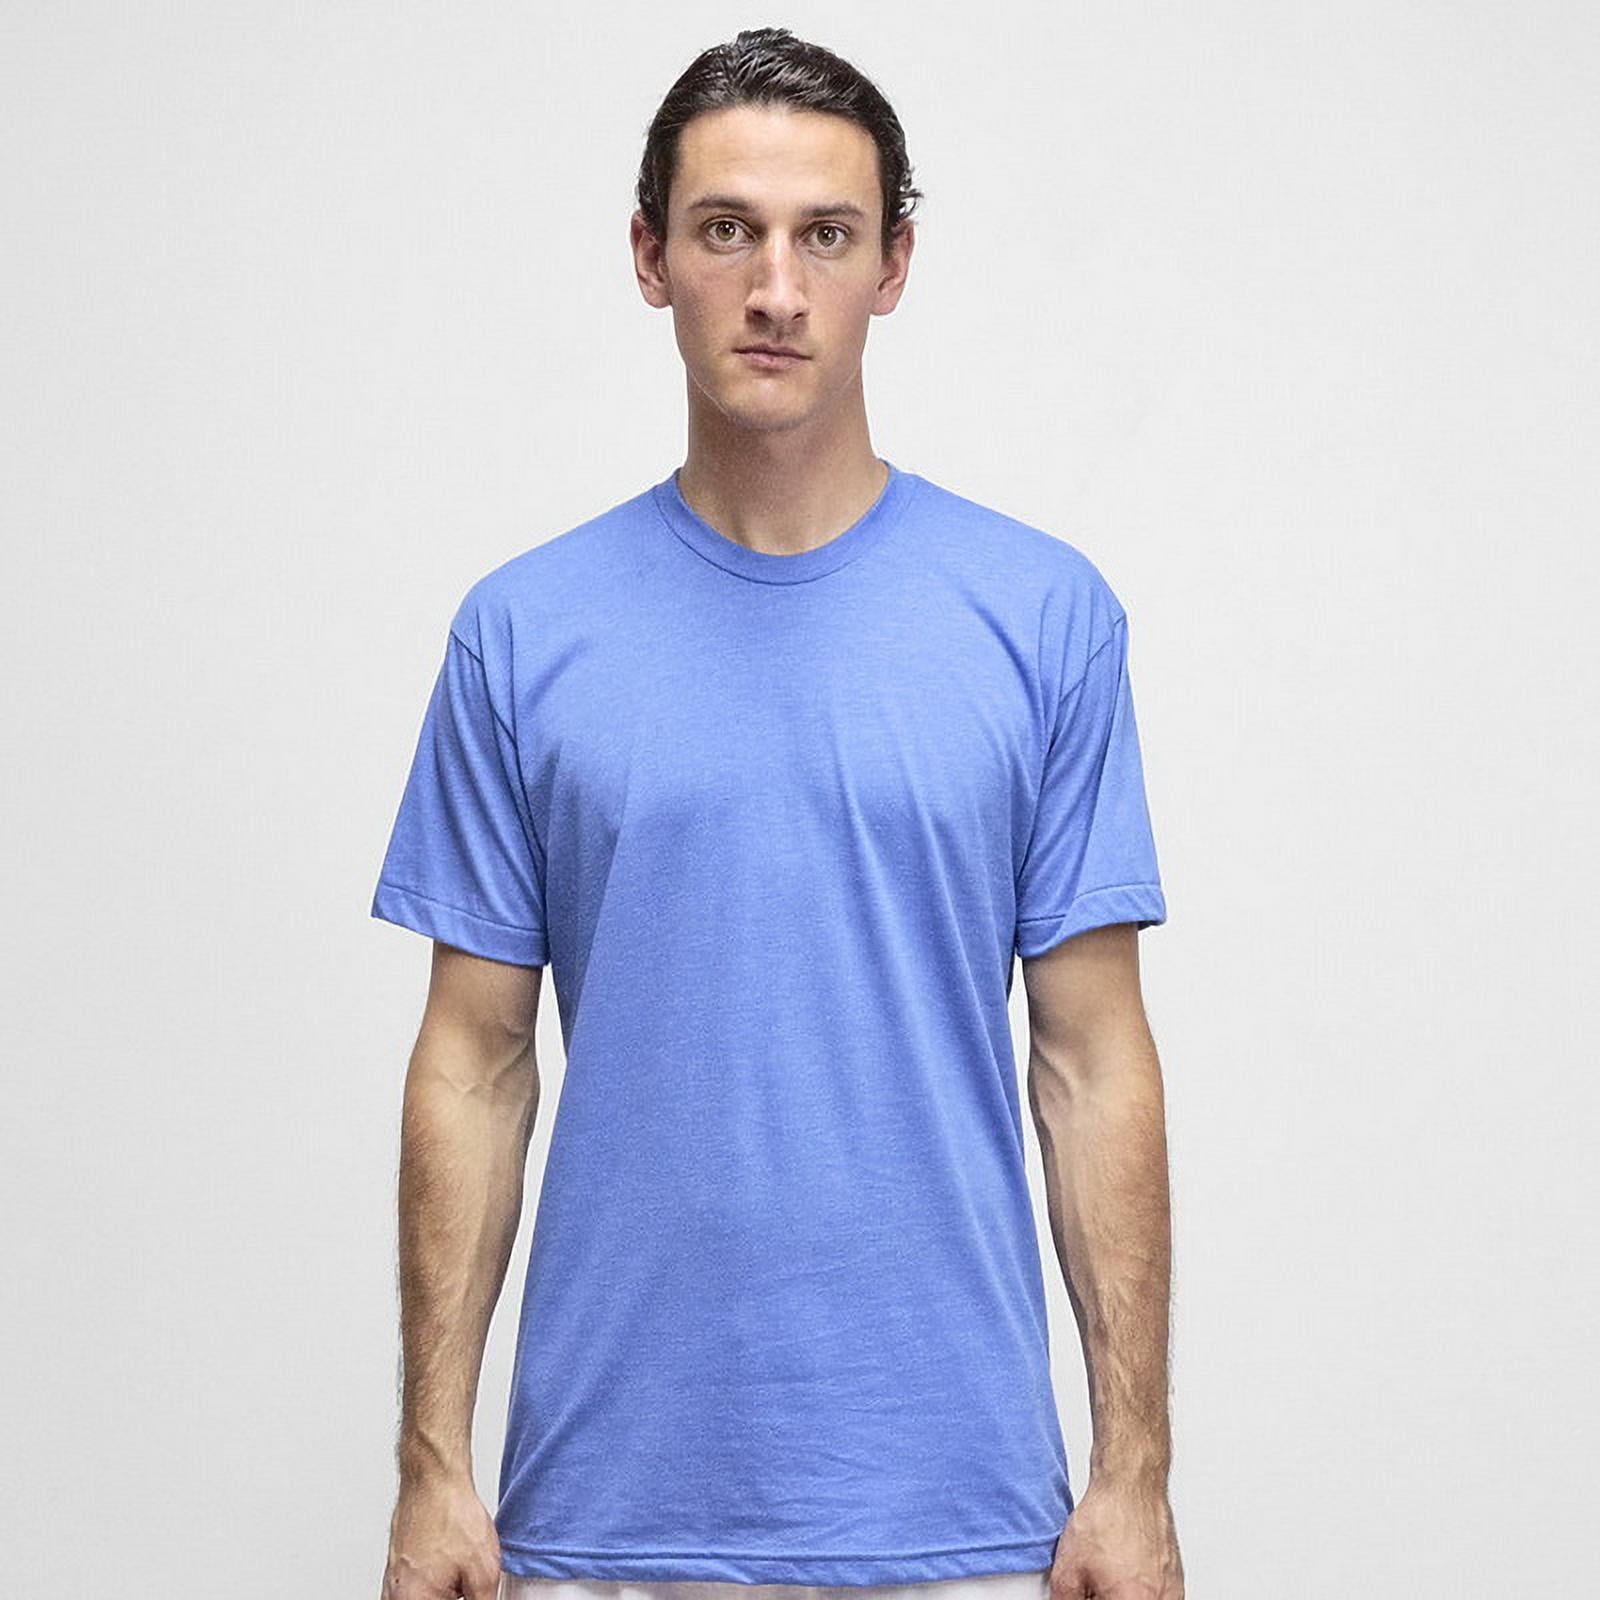 Los Angeles Apparel FF01 50/50 Poly Cotton Tee, Heather Lake Blue, S 